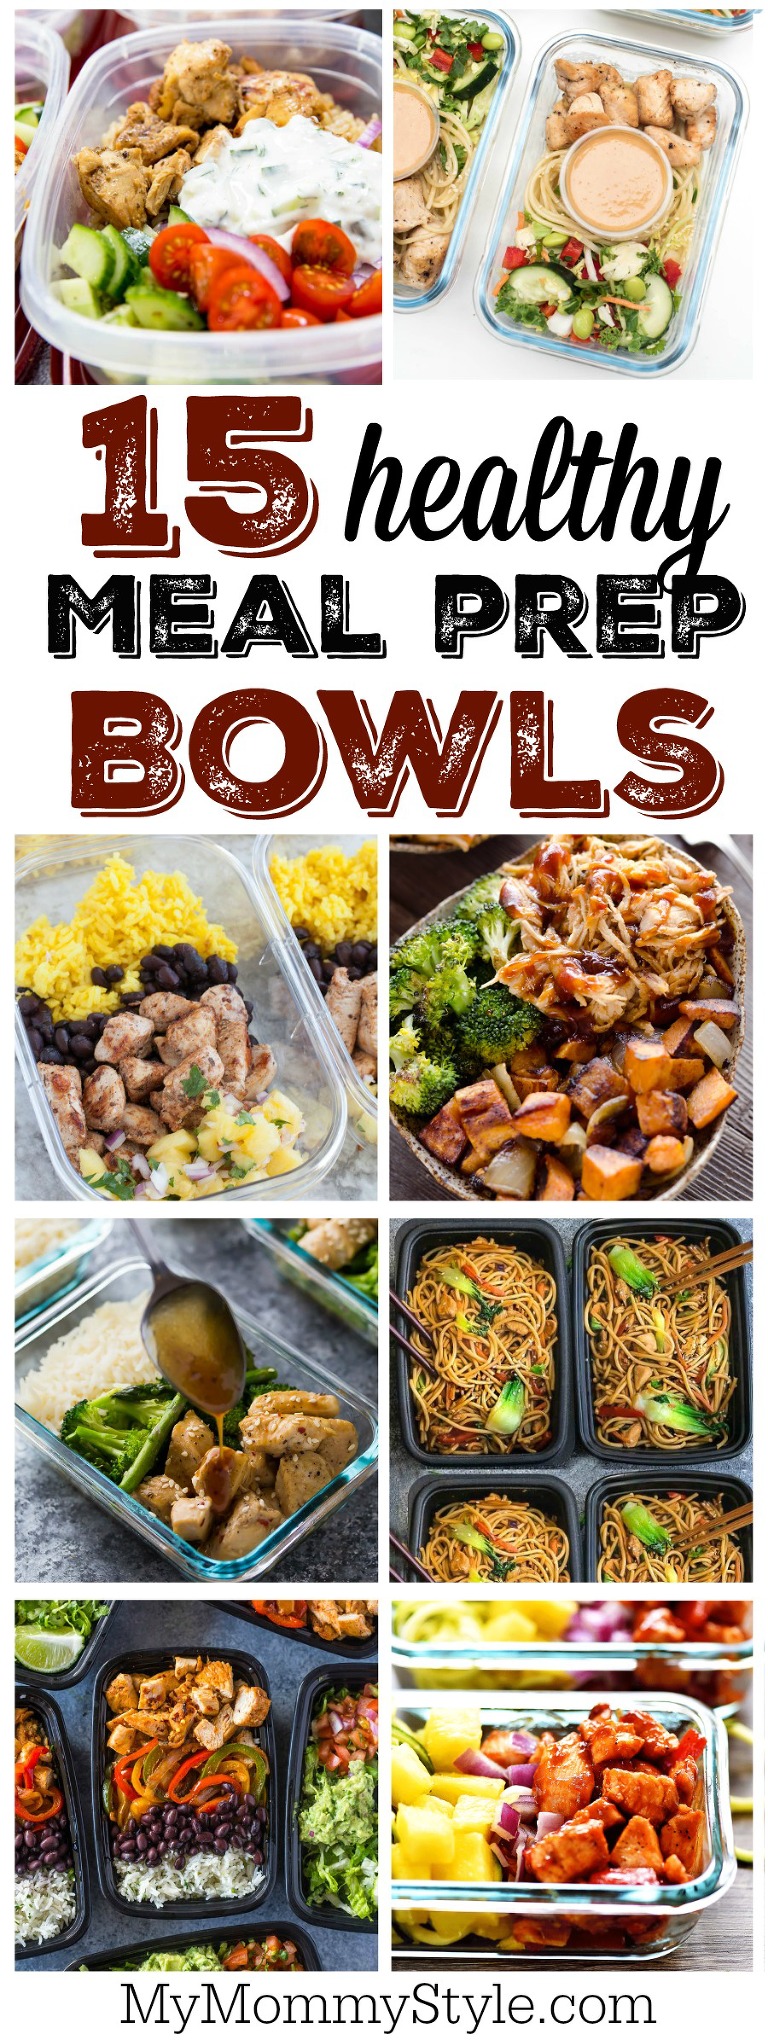 https://www.mymommystyle.com/wp-content/uploads/2017/05/24-21103-post/15-healthy-meal-prep-bowls(pp_w768_h2040).jpg